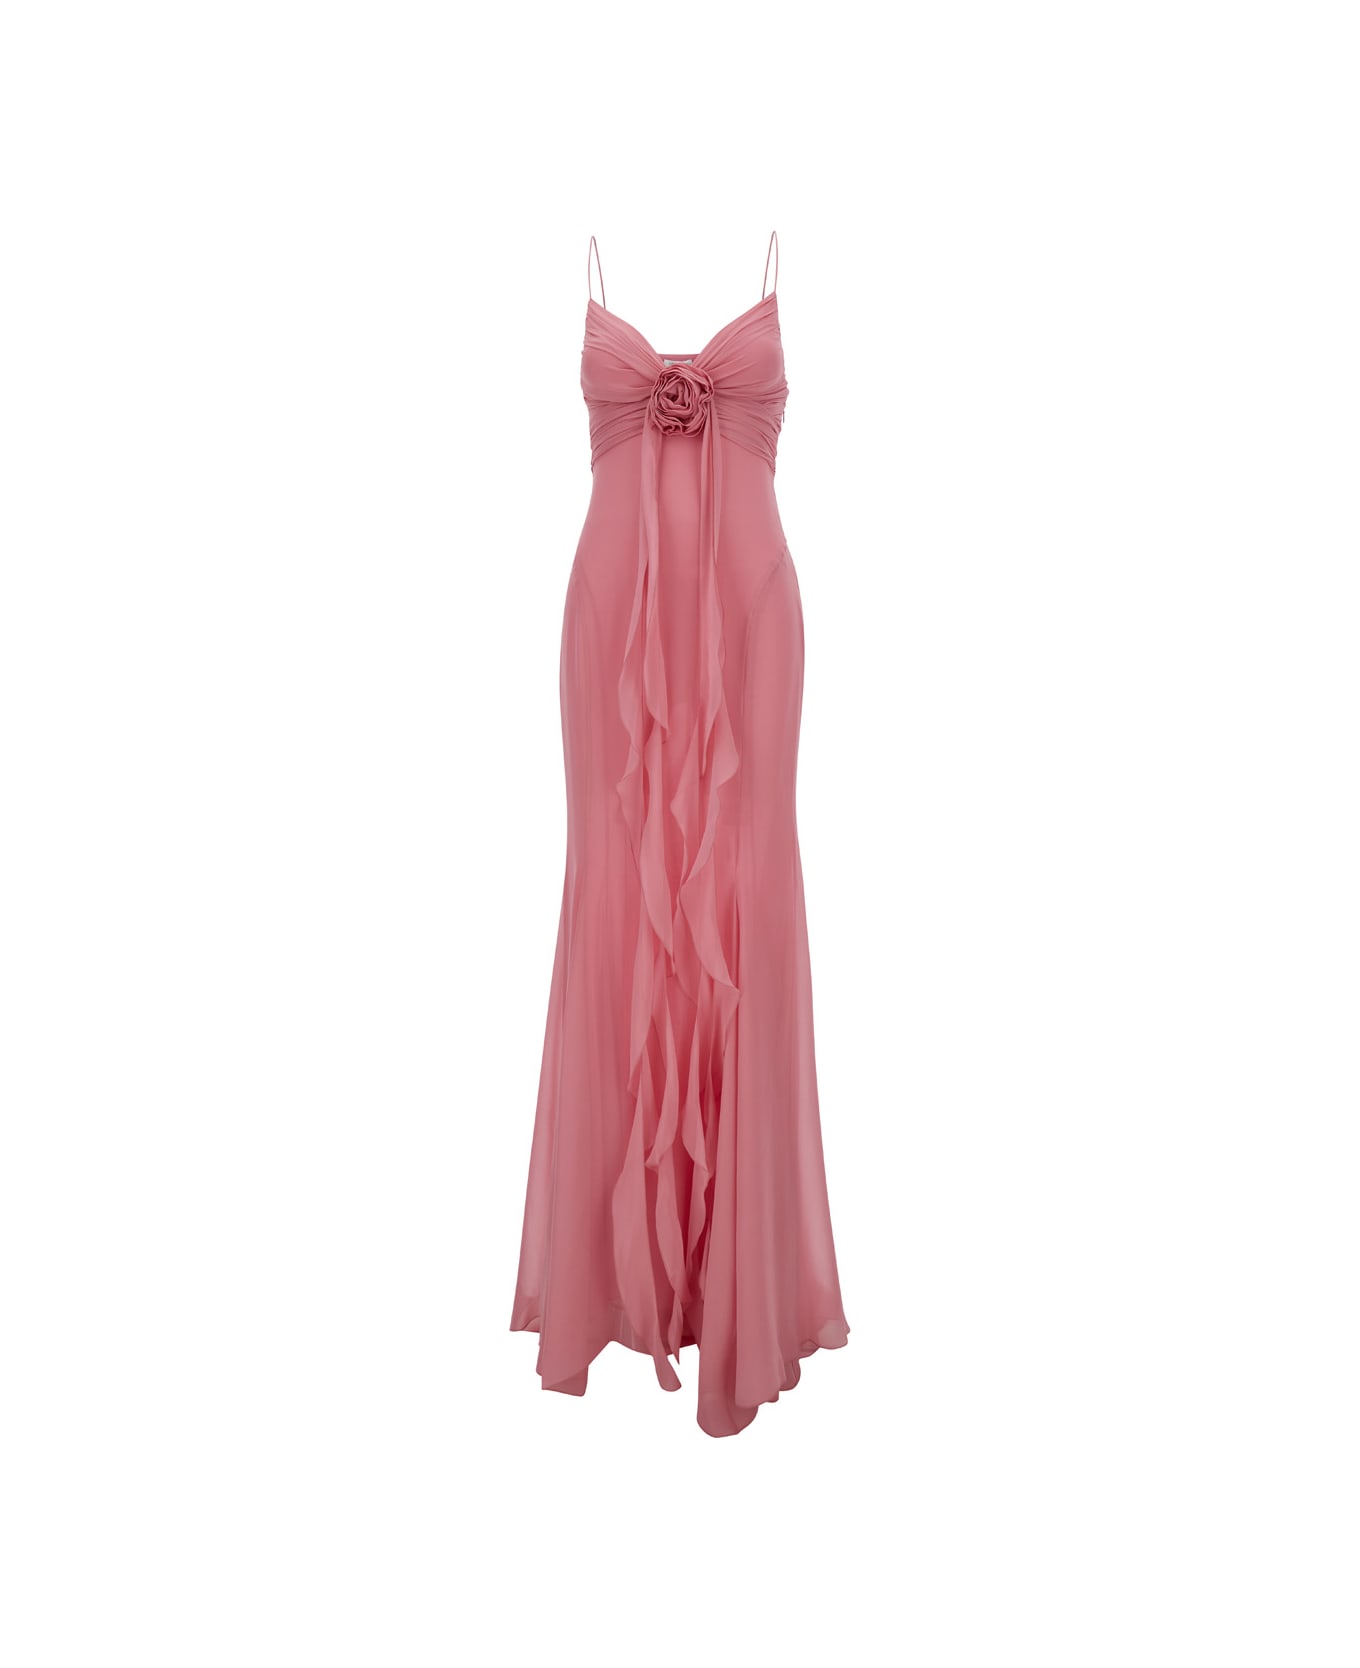 Blumarine Pink Draped Maxi Dress With Rose Applique In Silk Woman - Pink